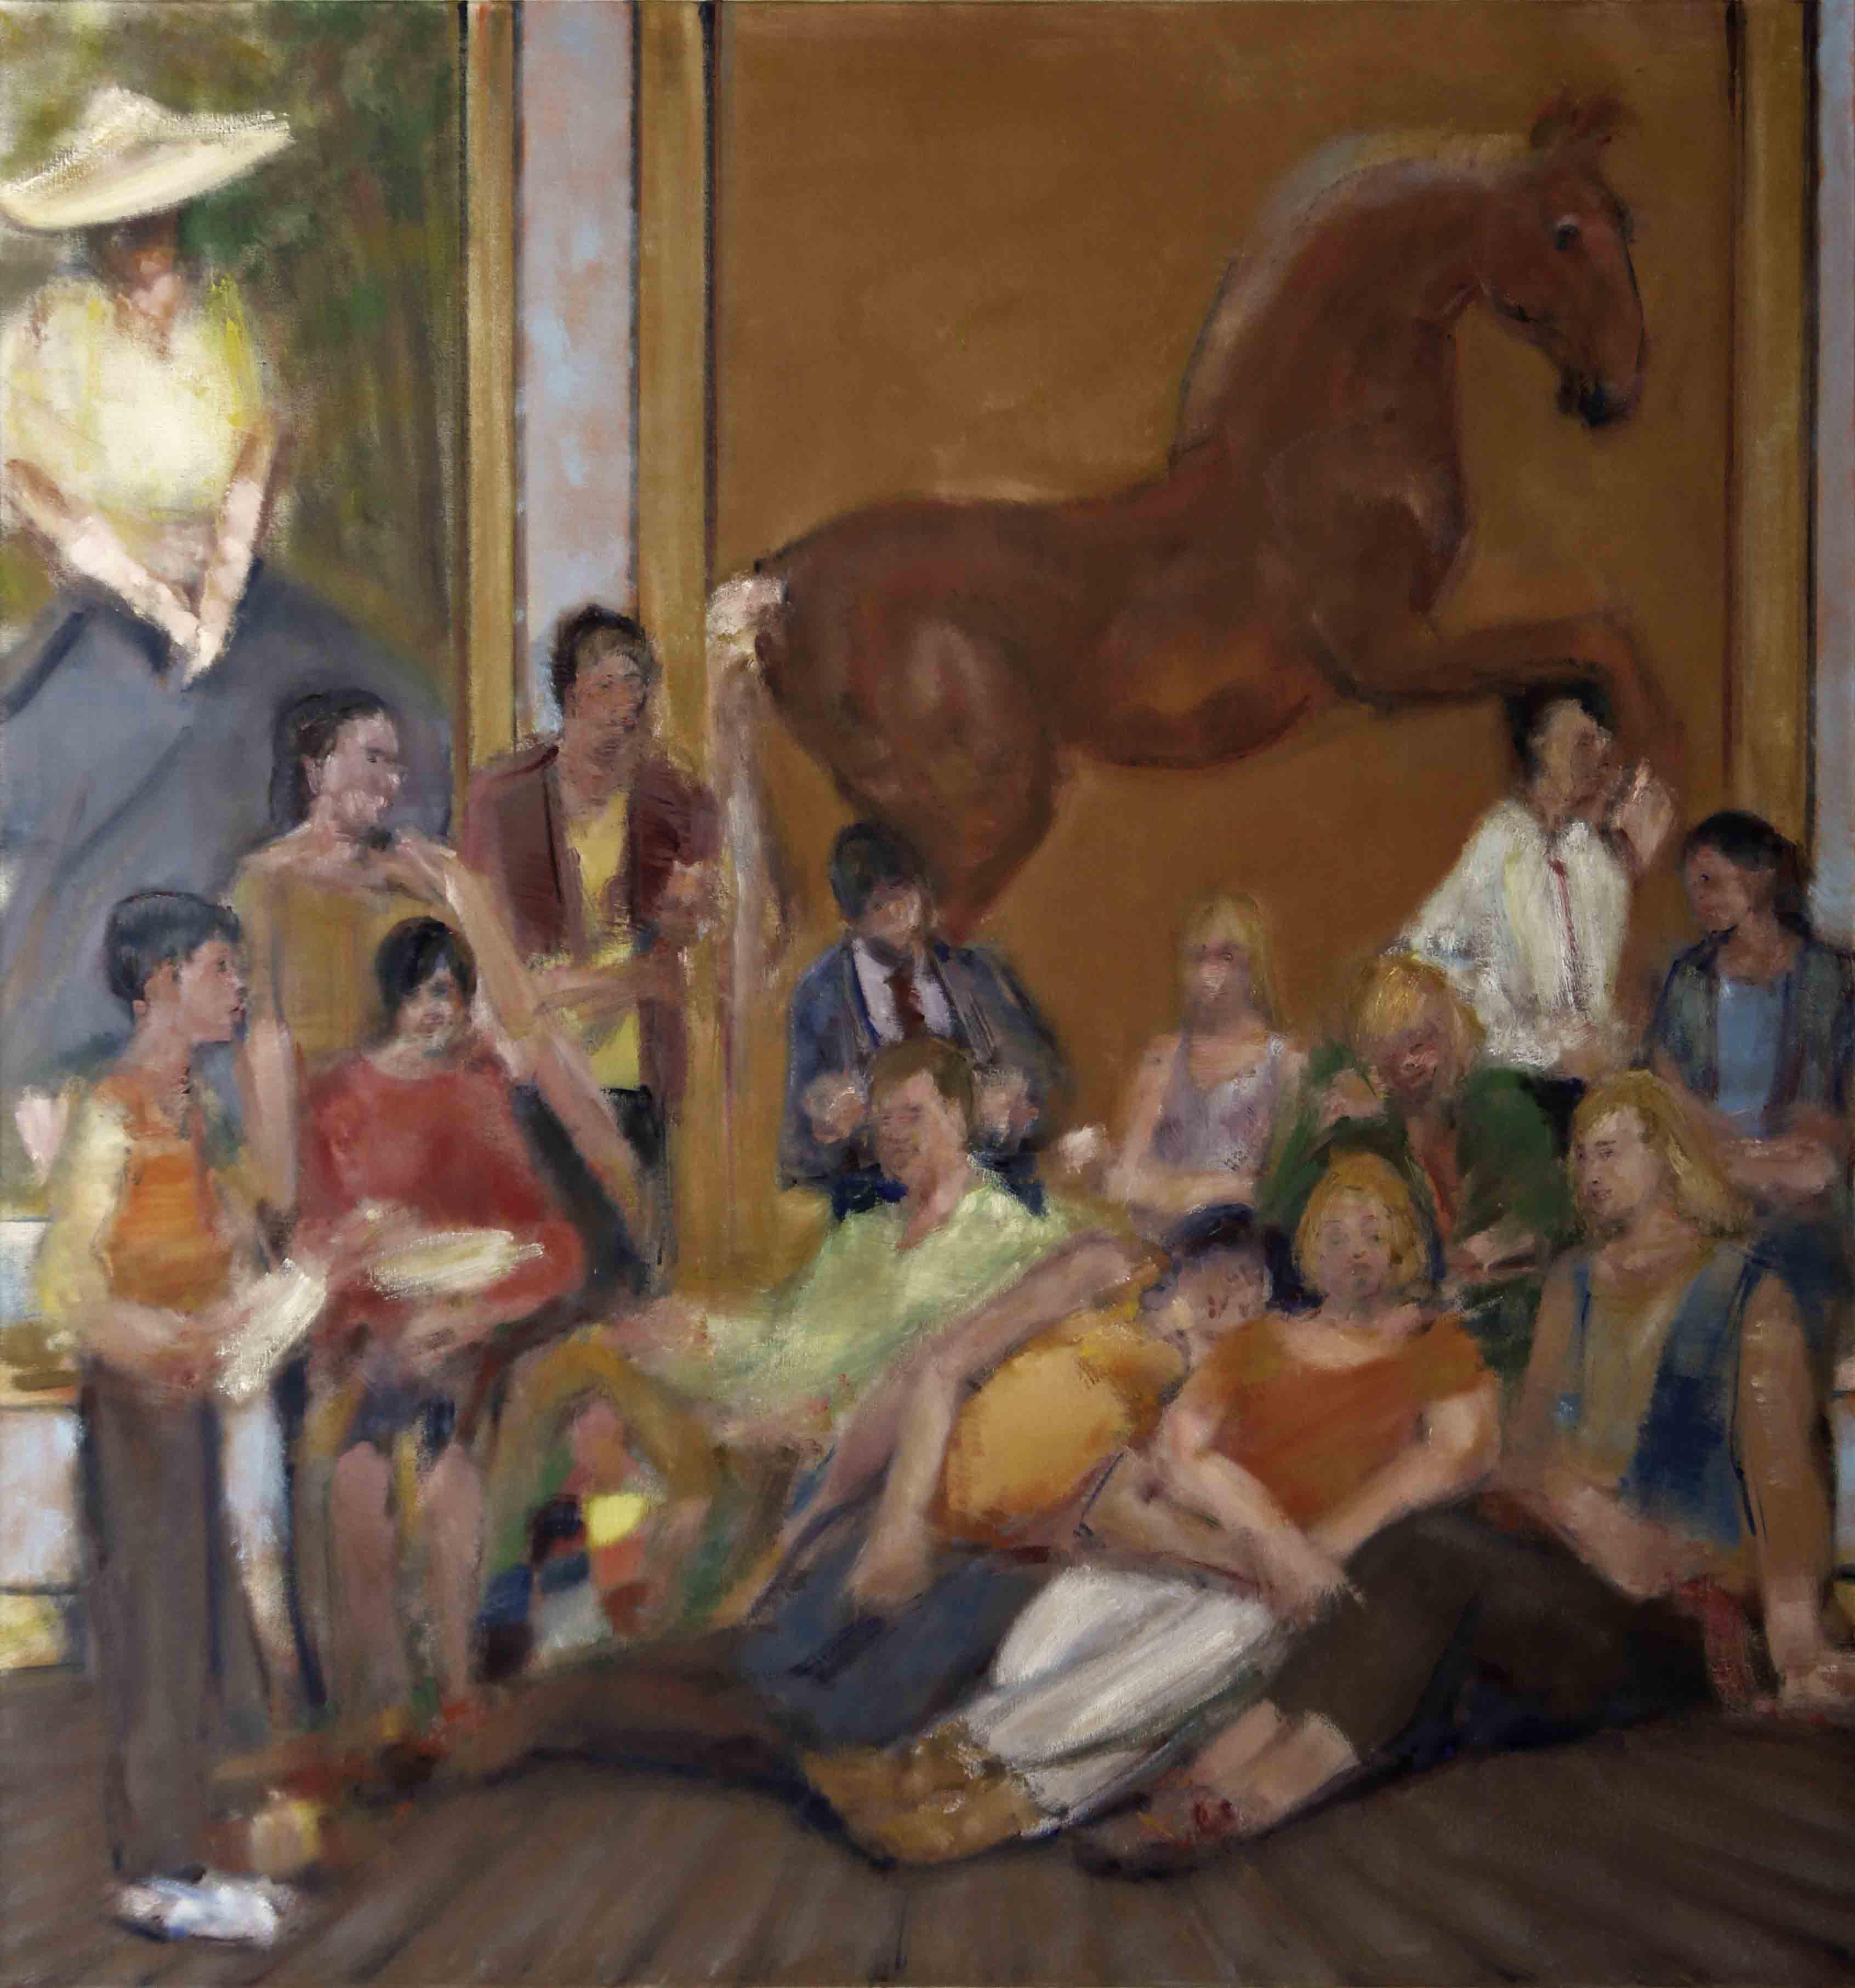 NATIONAL GALLERY, people sitting in front of painting, contemporary still life - Painting by Simon Nicholas